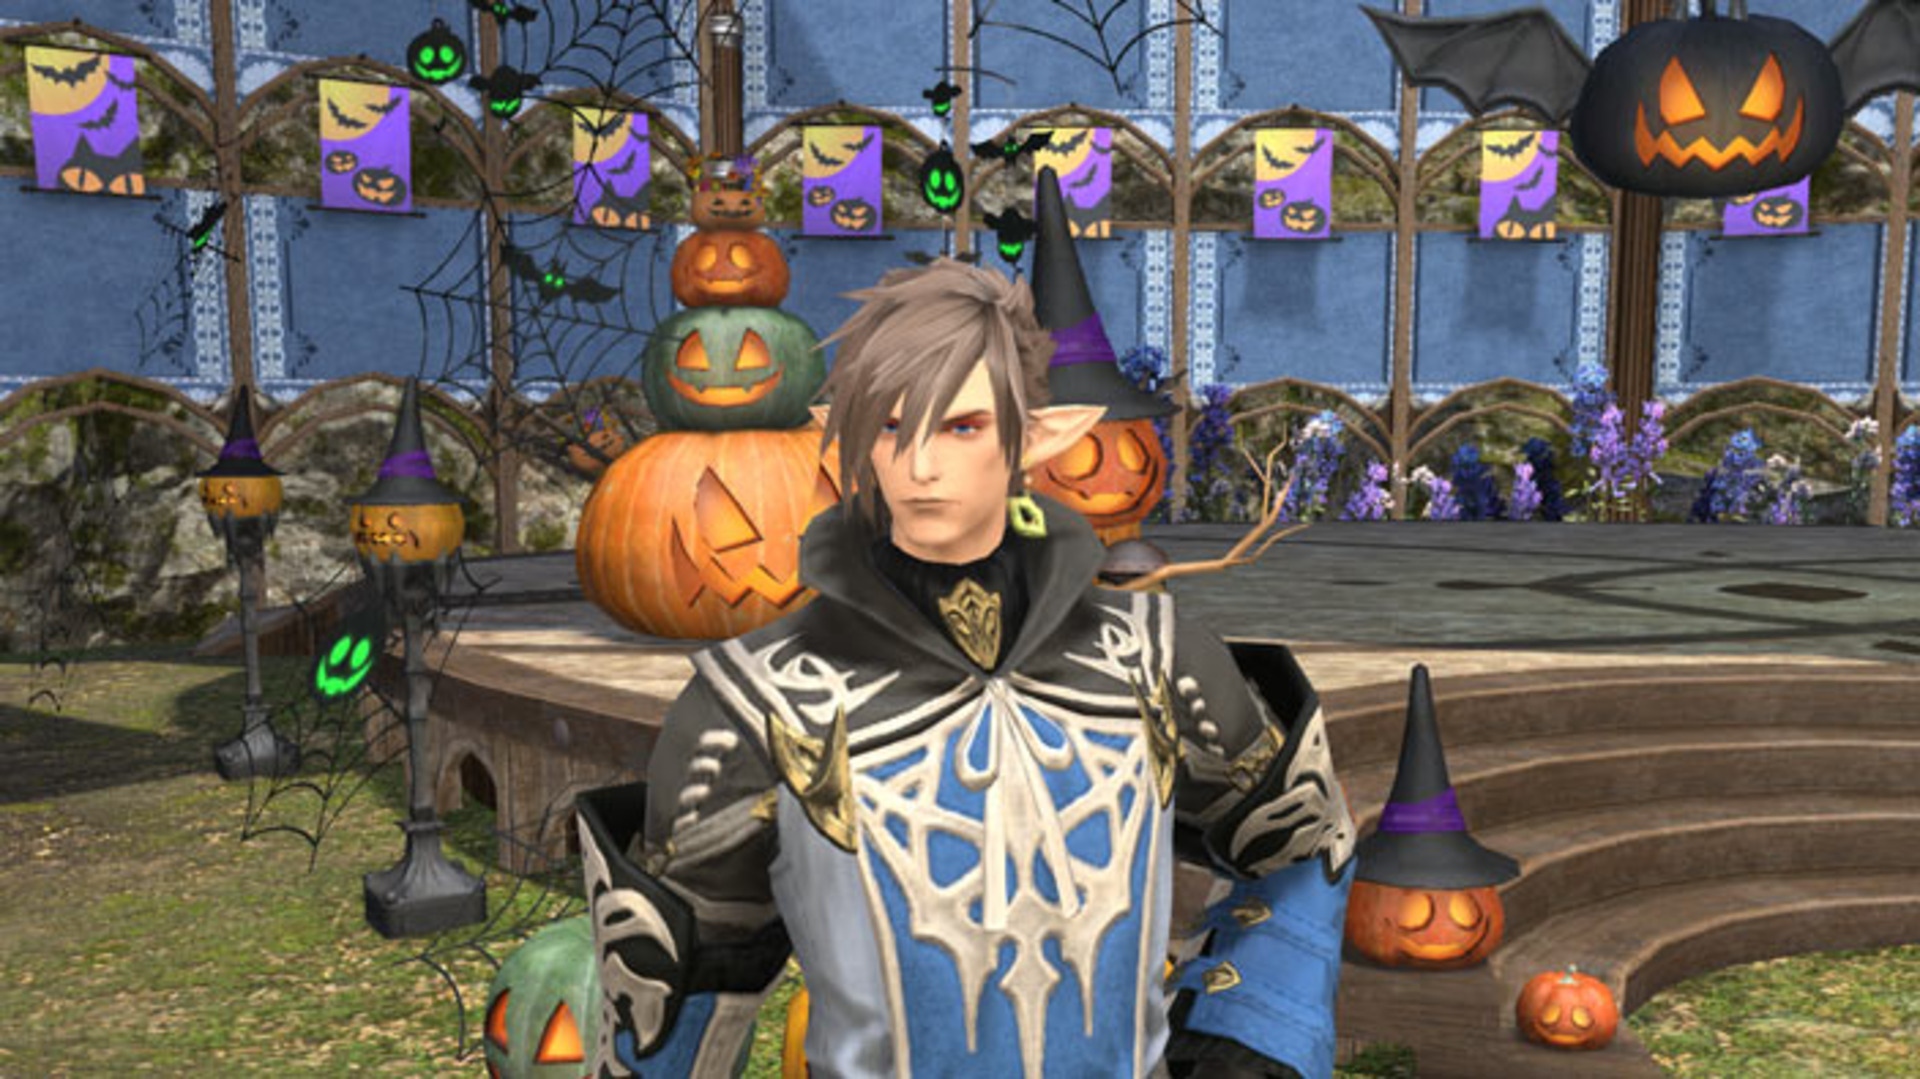 Final Fantasy 14's Halloween event is actually in time for Halloween